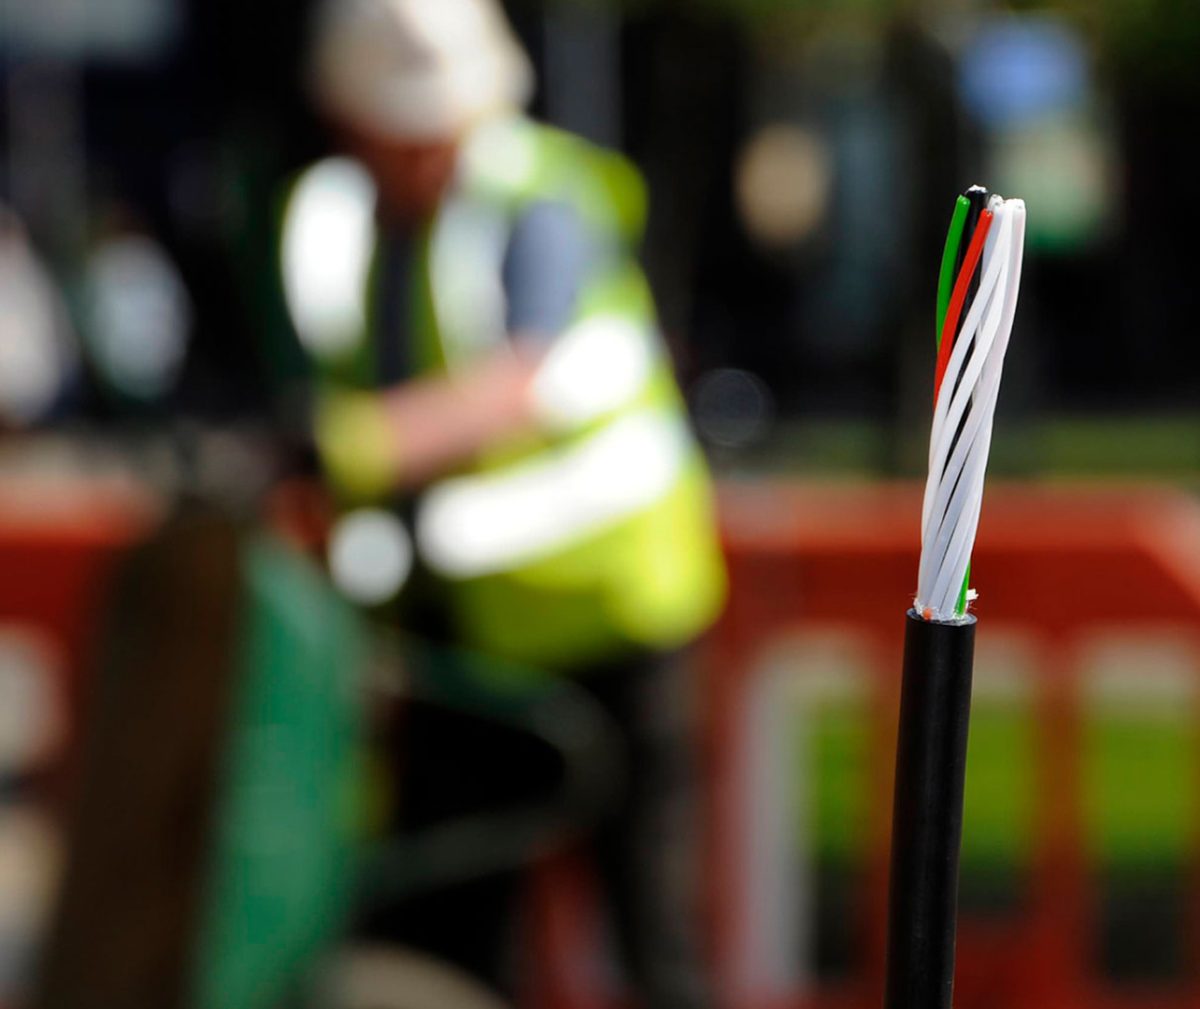 A close-up of a fiber optic cable with several internal wires exposed, each coated in different colours including white, red, green, and black. In the blurred background, a construction worker wearing a high-visibility vest and a hard hat is engaged in work.